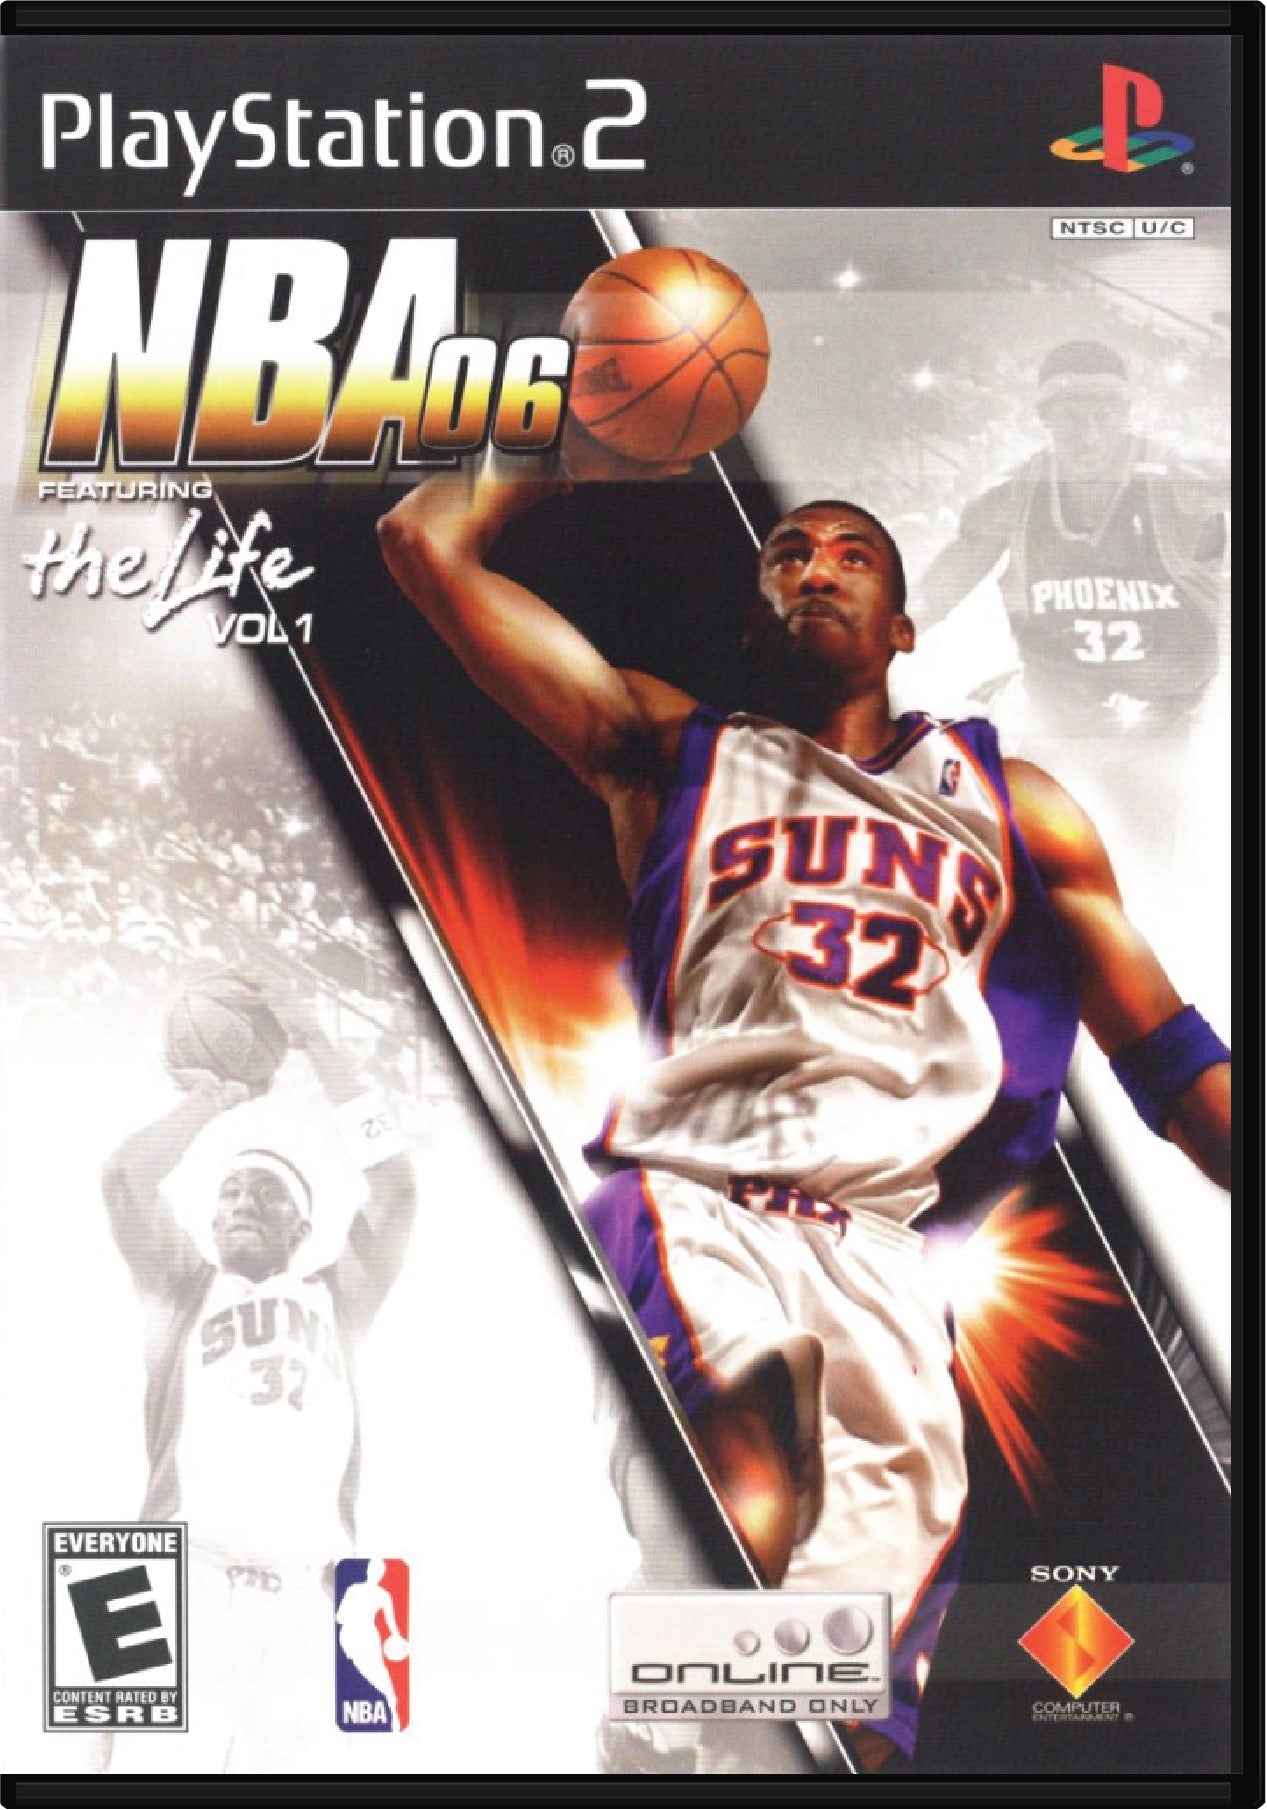 NBA 06 Cover Art and Product Photo